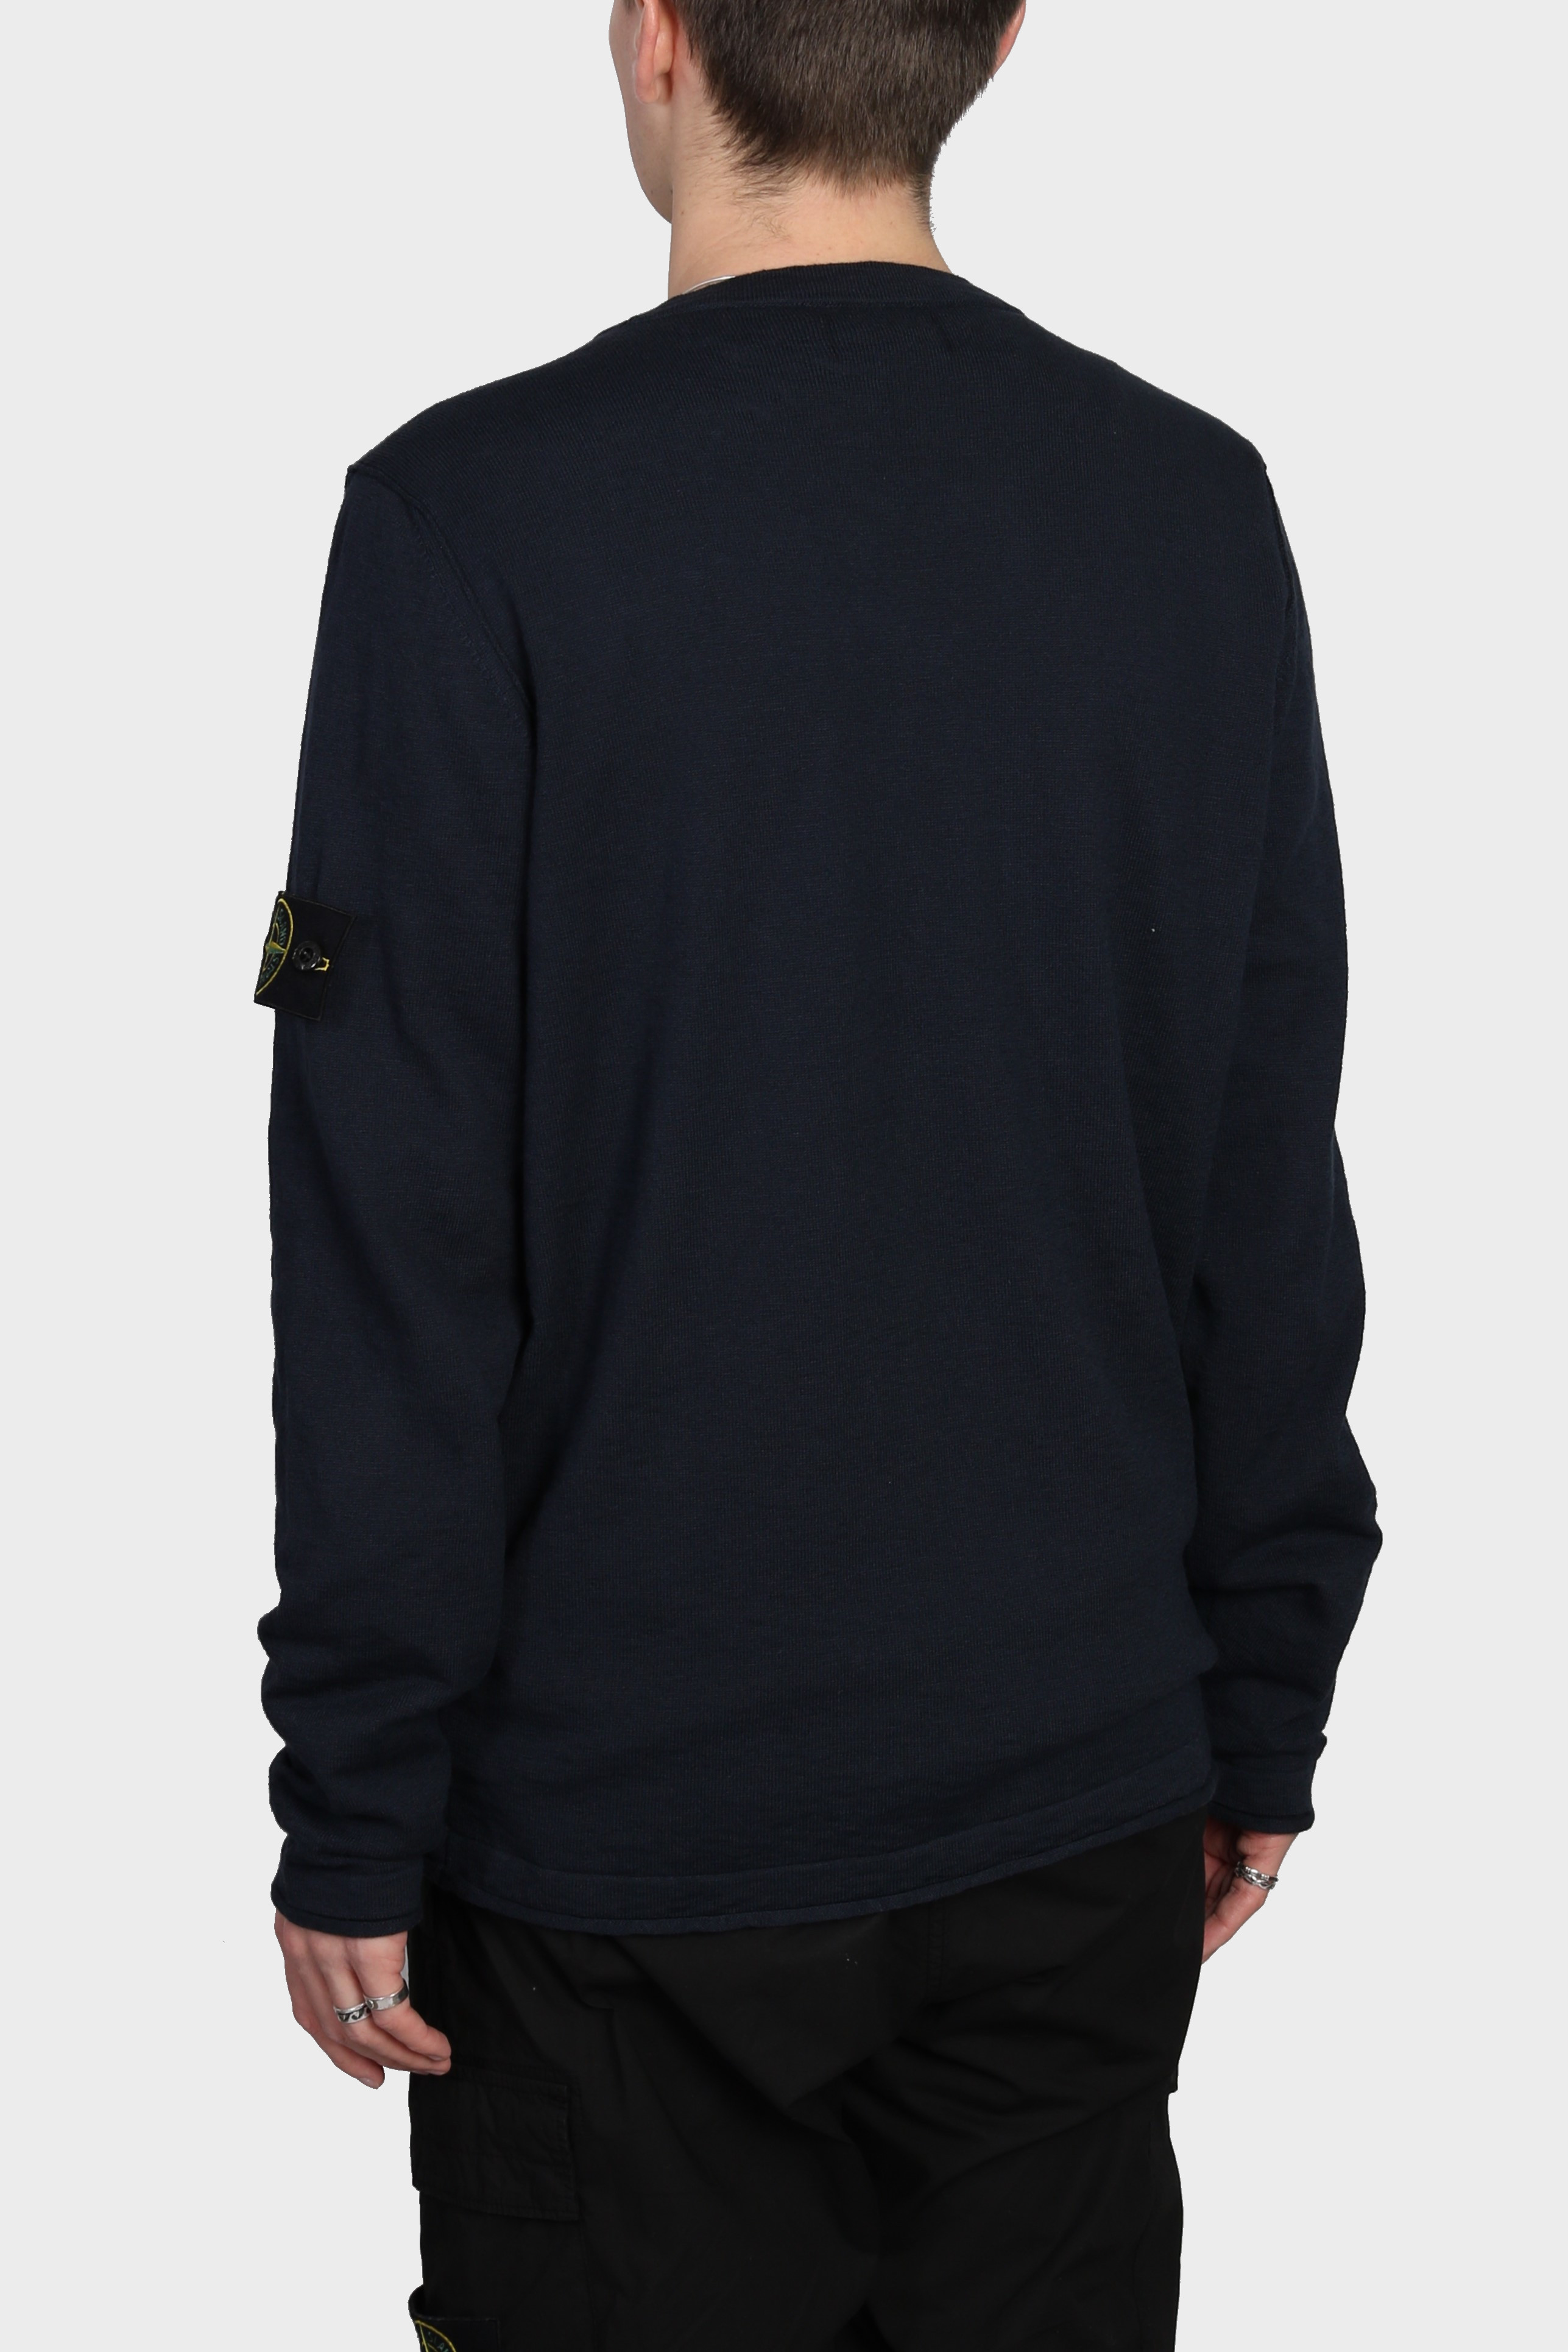 STONE ISLAND Summer Knit Pullover in Navy M